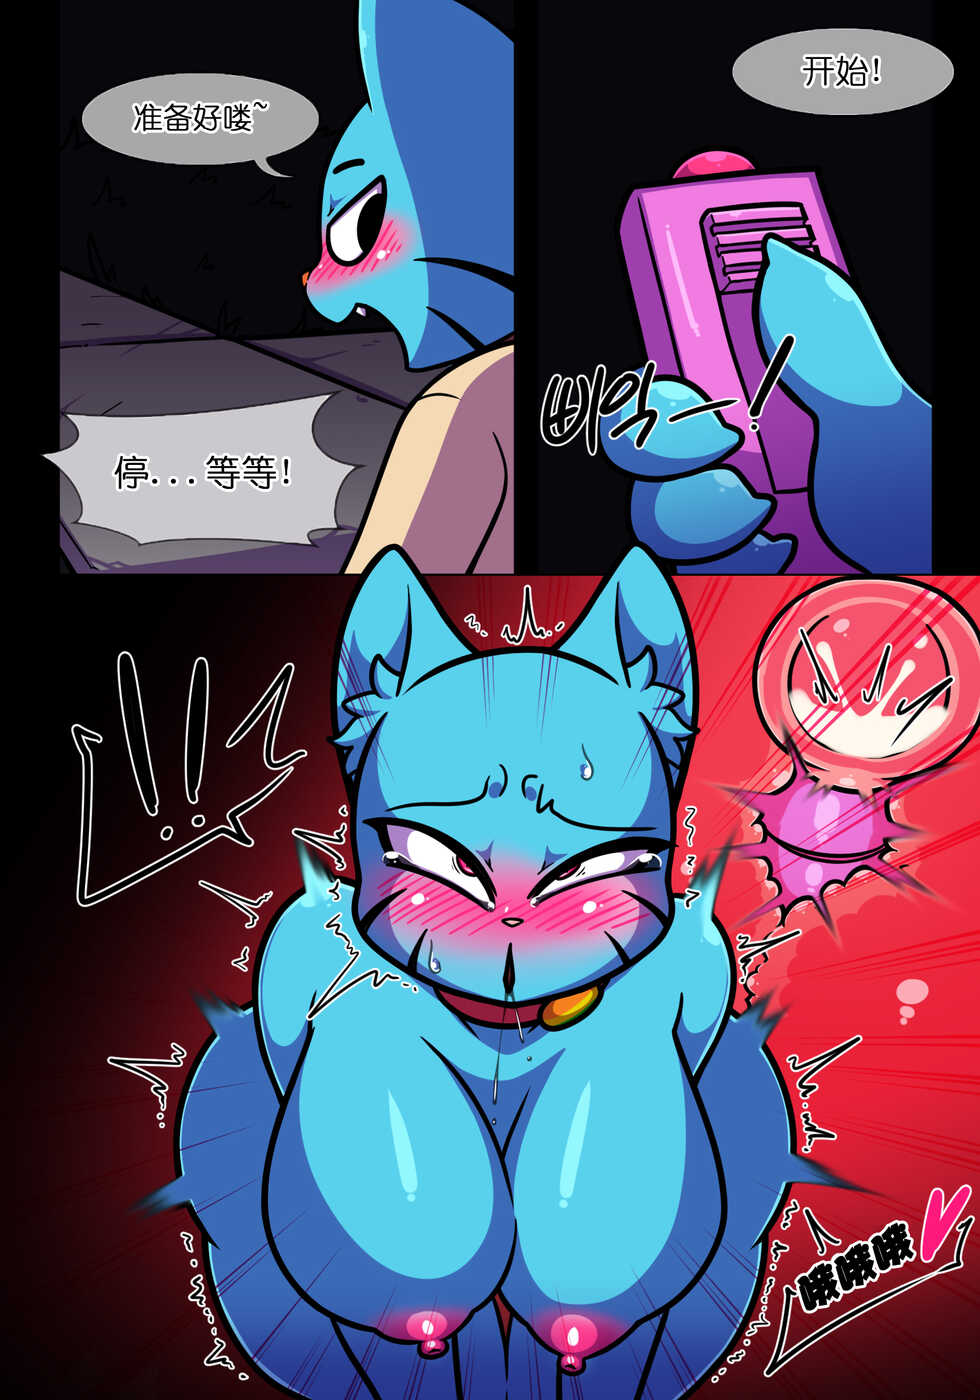 [Wherewolf] Lusty World of Nicole Ep. 5 - Controller pet [CN] - Page 10